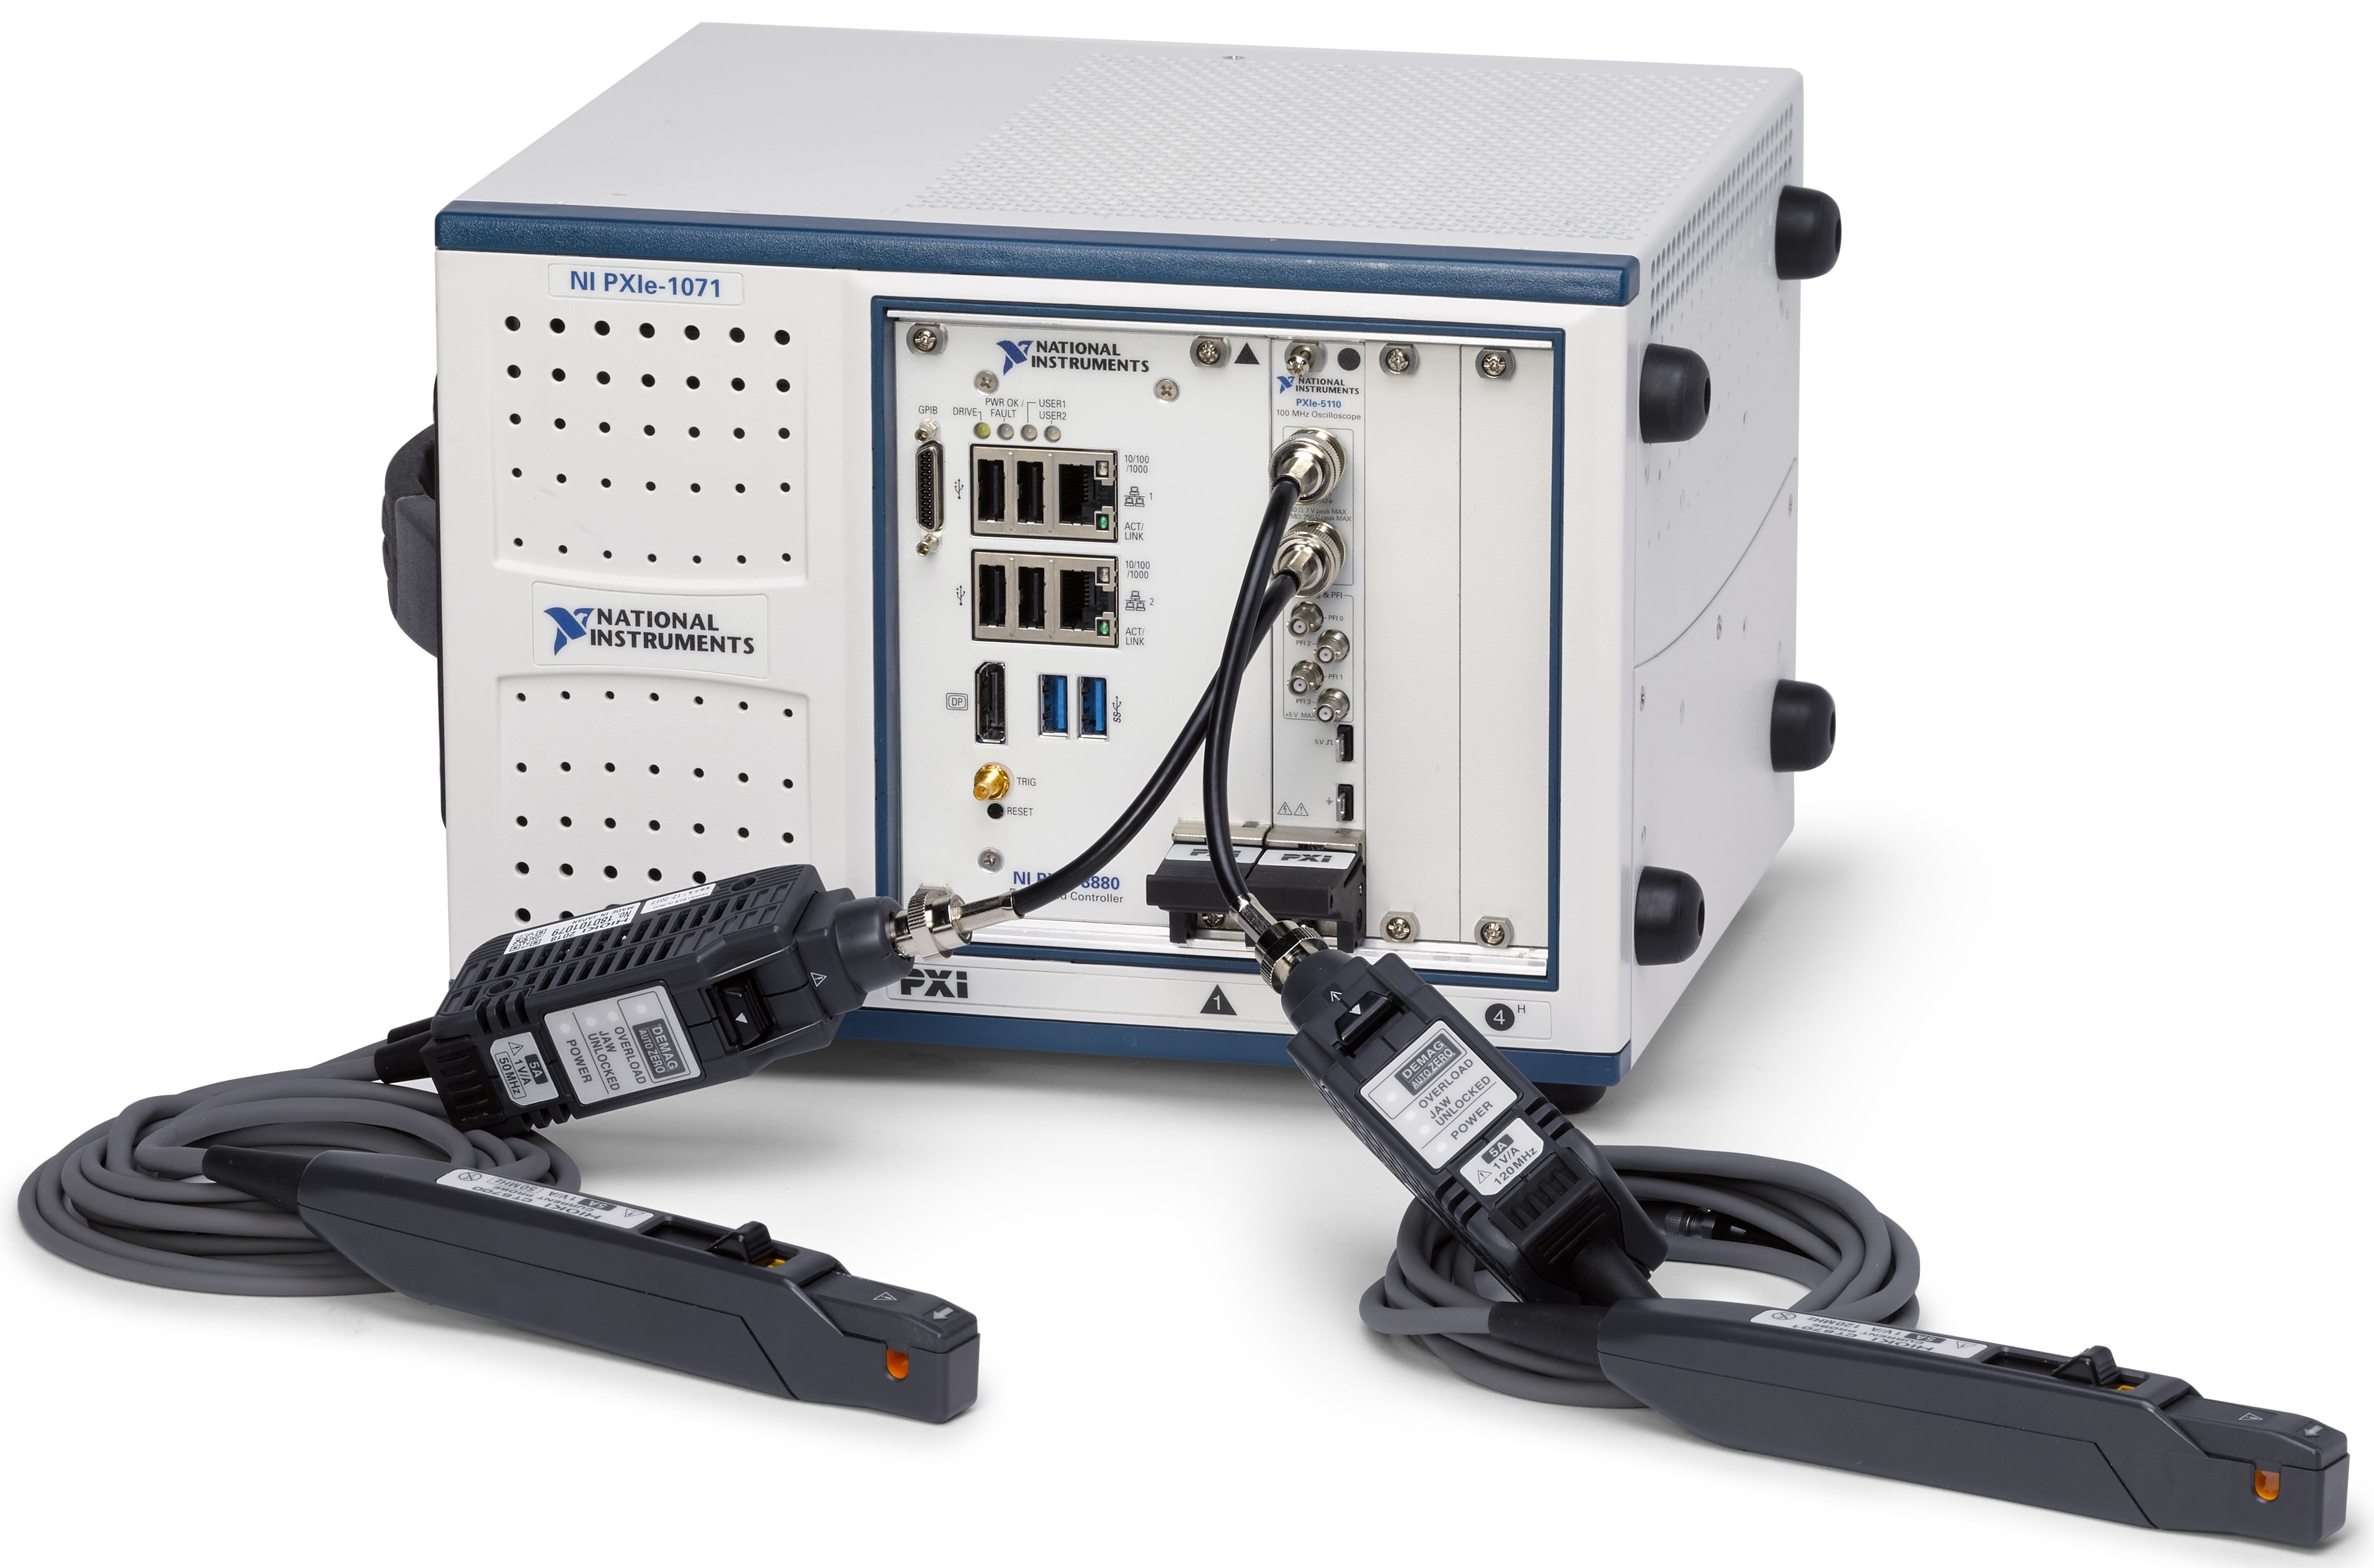 Hioki current probes may require short BNC adapters when used with closely adjacent oscilloscope channels